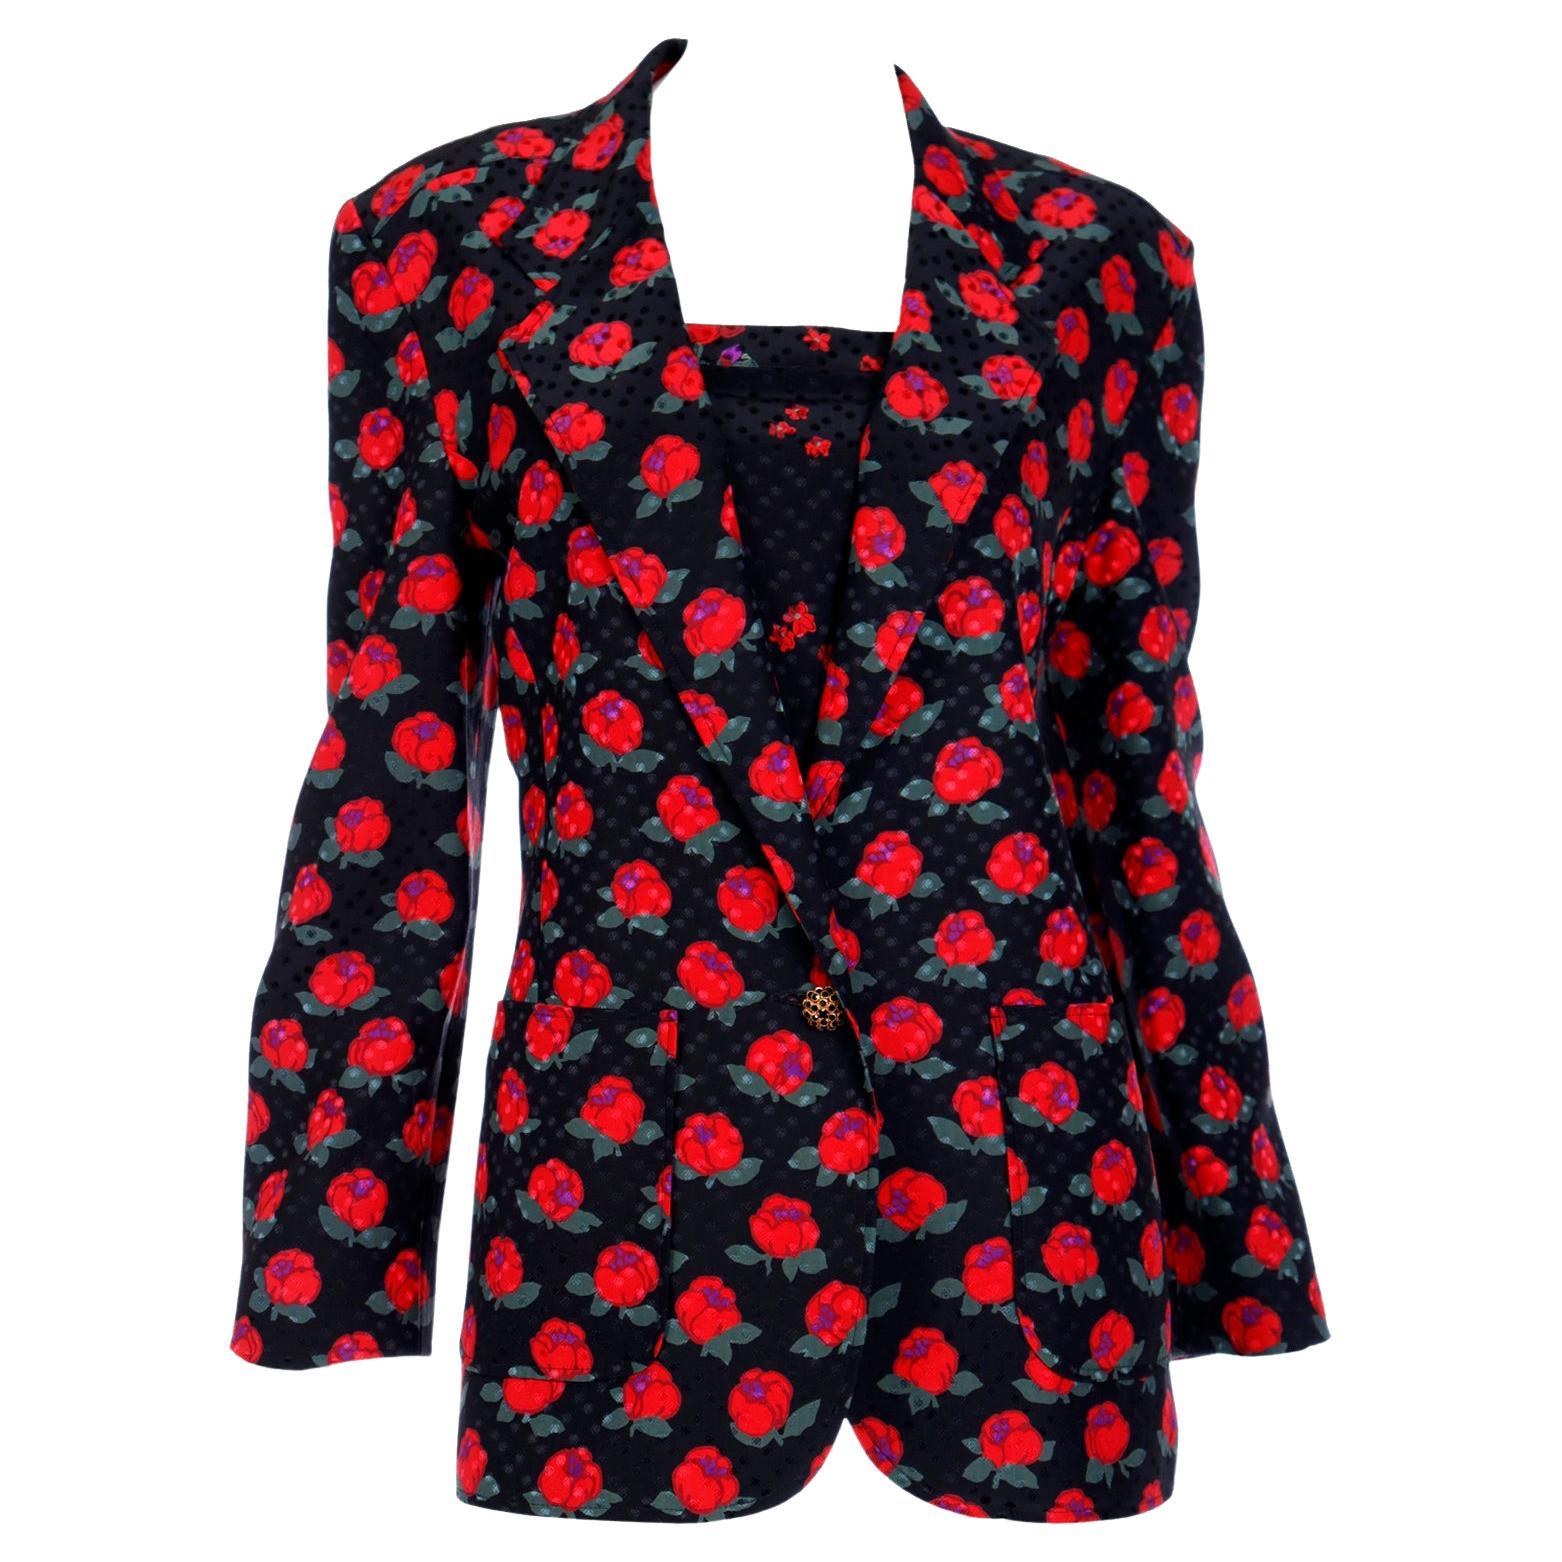 Vintage Louis Feraud  Silk Black and Red Rose Print Jacket and Camisole Top  For Sale